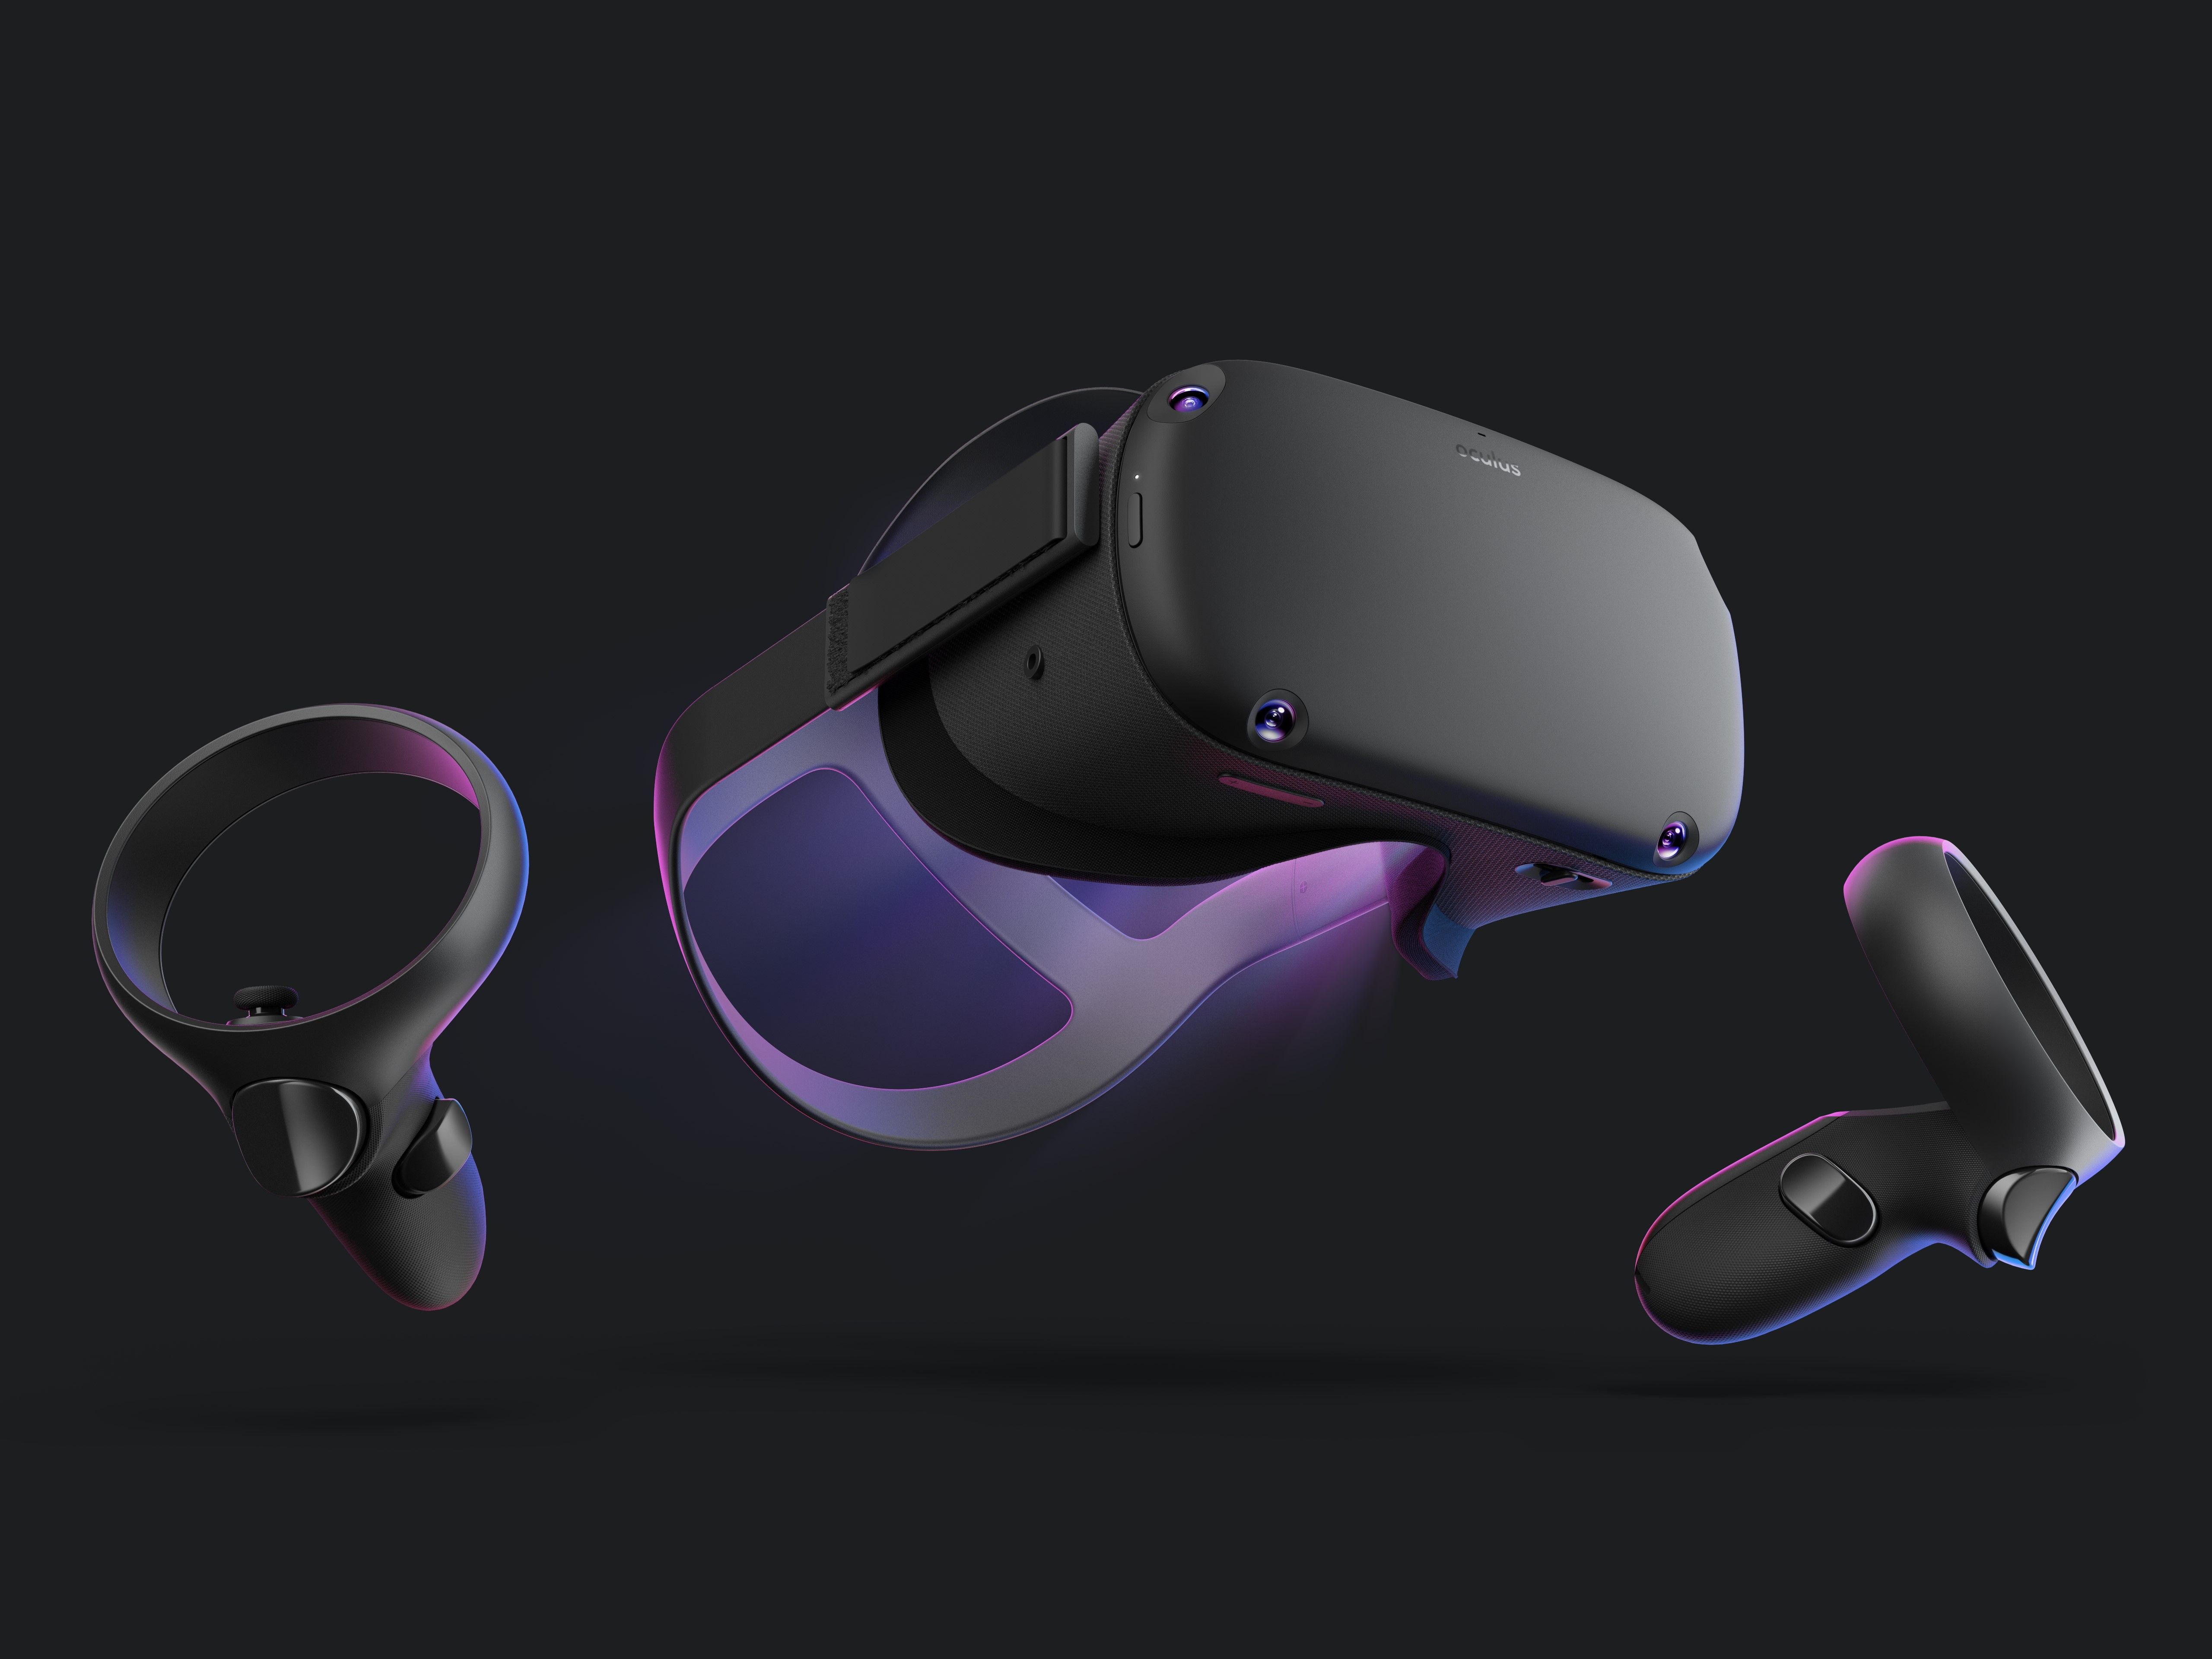 Review: The Oculus Quest is the Nintendo Switch of